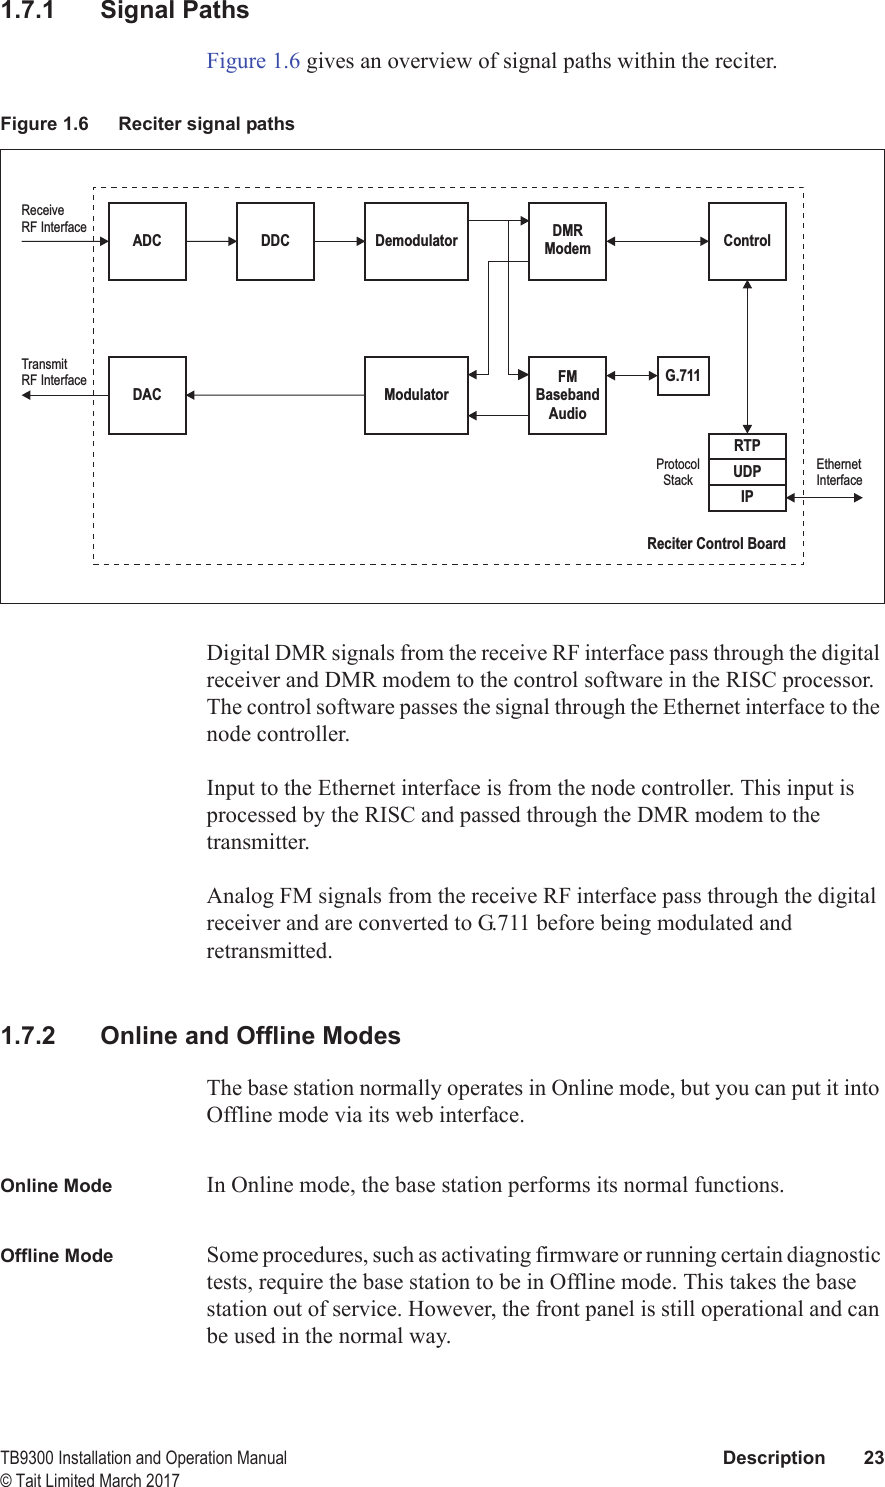  TB9300 Installation and Operation Manual Description 23© Tait Limited March 20171.7.1 Signal PathsFigure 1.6 gives an overview of signal paths within the reciter. Digital DMR signals from the receive RF interface pass through the digital receiver and DMR modem to the control software in the RISC processor. The control software passes the signal through the Ethernet interface to the node controller.Input to the Ethernet interface is from the node controller. This input is processed by the RISC and passed through the DMR modem to the transmitter.Analog FM signals from the receive RF interface pass through the digital receiver and are converted to G.711 before being modulated and retransmitted.1.7.2 Online and Offline ModesThe base station normally operates in Online mode, but you can put it into Offline mode via its web interface.Online Mode In Online mode, the base station performs its normal functions. Offline Mode Some procedures, such as activating firmware or running certain diagnostic tests, require the base station to be in Offline mode. This takes the base station out of service. However, the front panel is still operational and can be used in the normal way. Figure 1.6 Reciter signal pathsModulatorDemodulator DMRModemFMBasebandAudioG.711ControlADC DDCDACRTPUDPIPTransmitRF InterfaceReceiveRF InterfaceEthernetInterfaceProtocolStackReciter Control Board